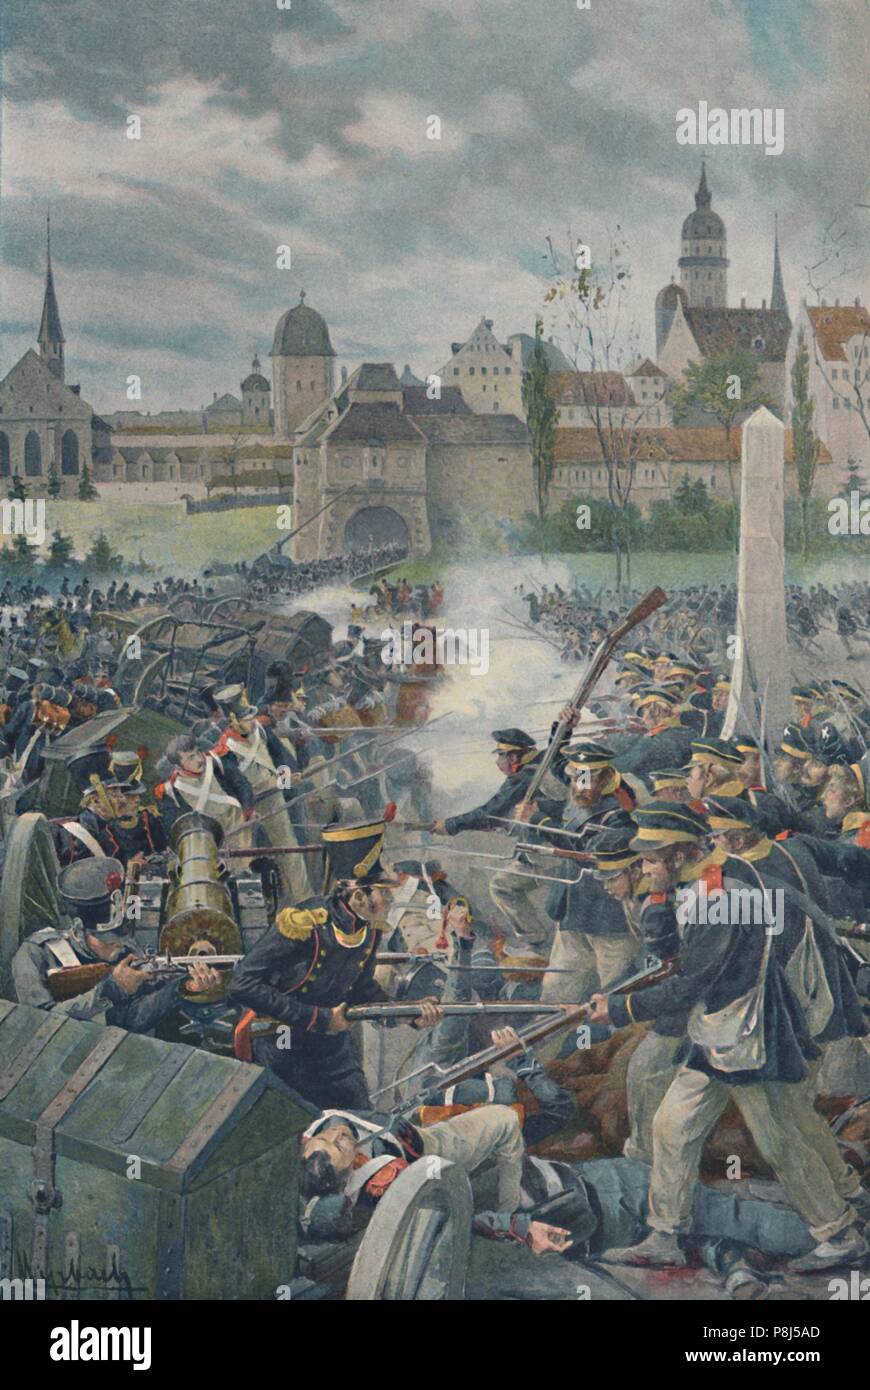 'The French Army Leaving Leipsic', 1813, (1896). The Battle of Leipzig or Battle of the Nations was fought from 16 to 19 October 1813, at Leipzig in G Stock Photo